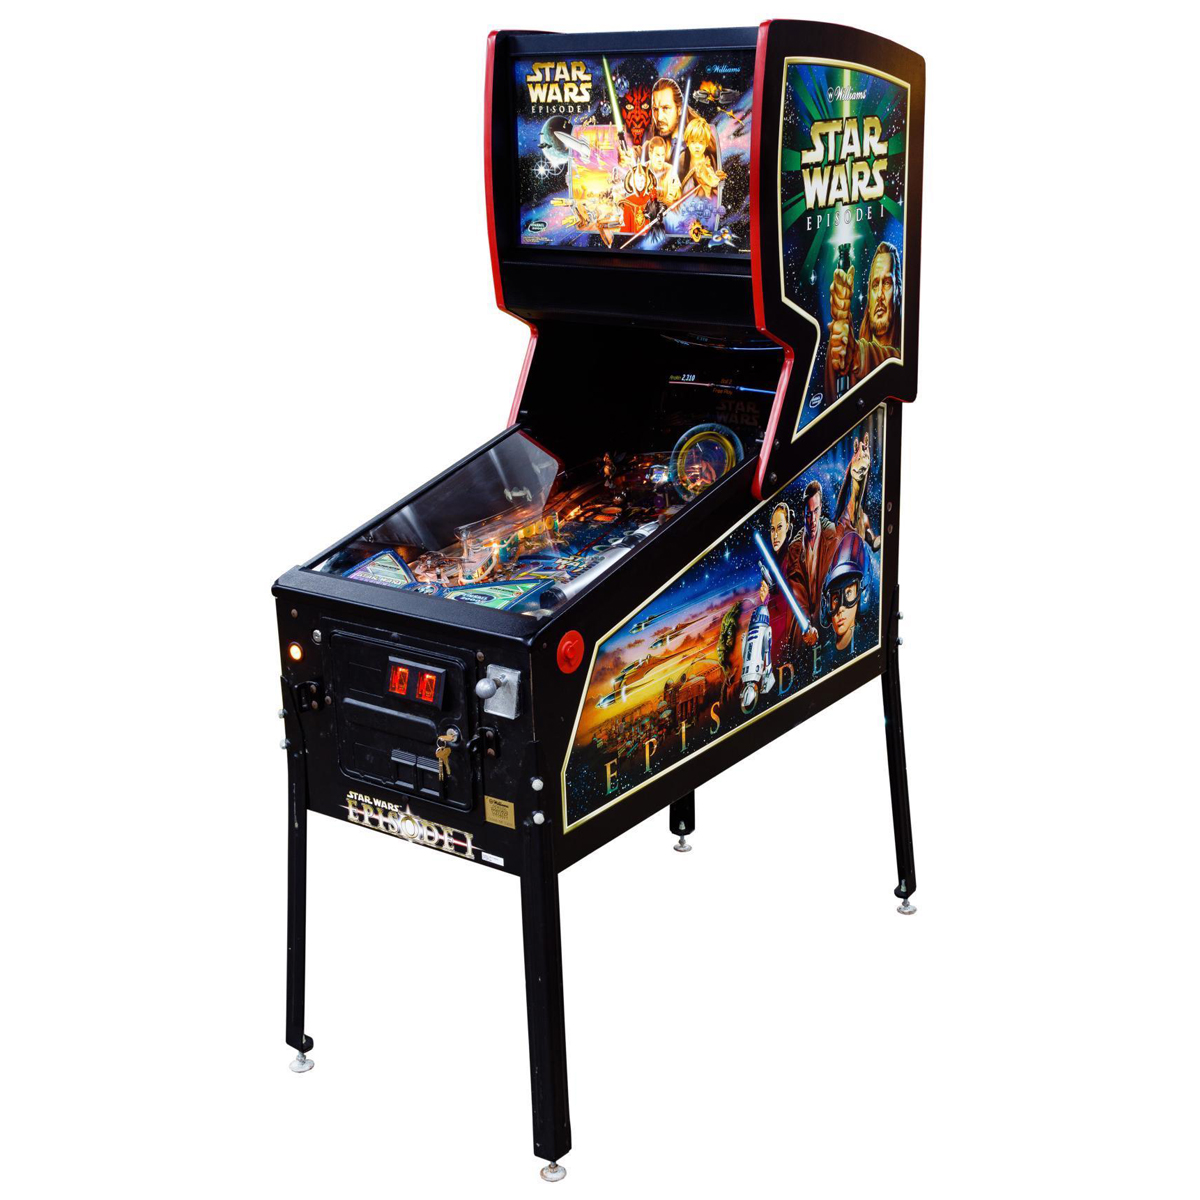 Star Wars™ Pinball Collection 2 - Epic Games Store